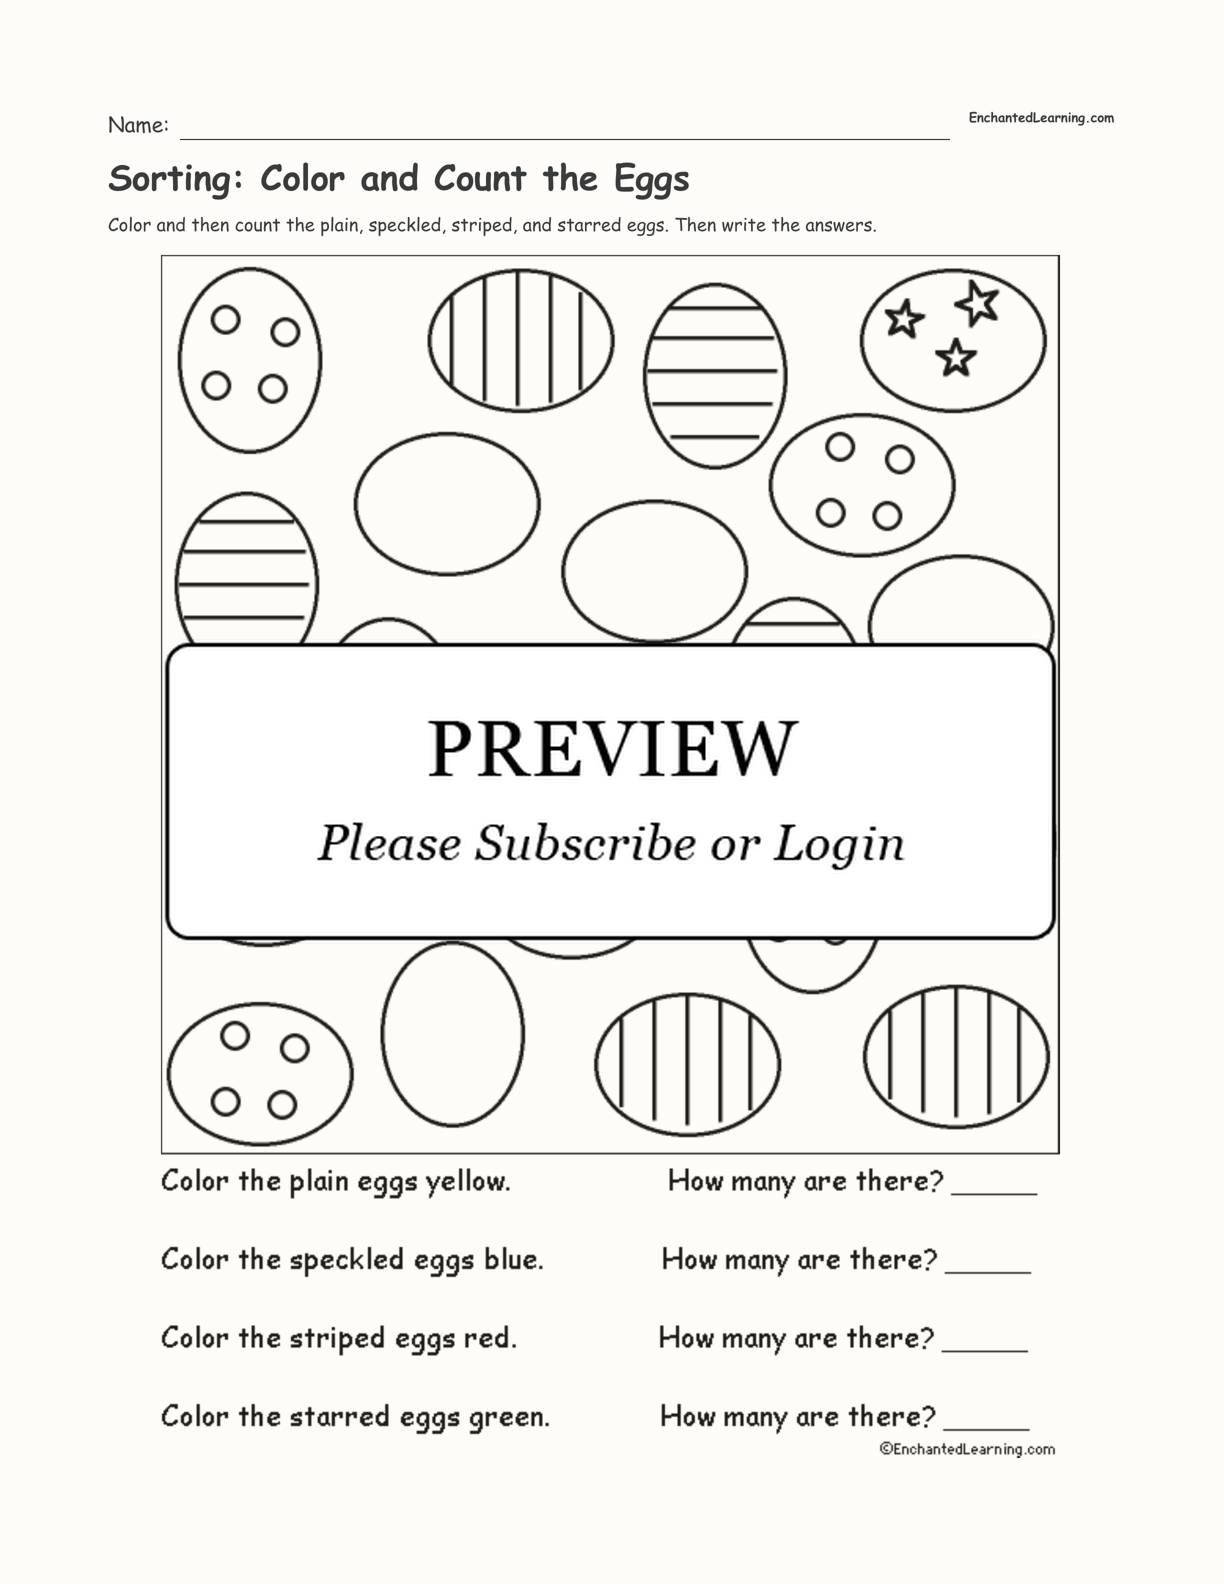 Sorting: Color and Count the Eggs interactive worksheet page 1